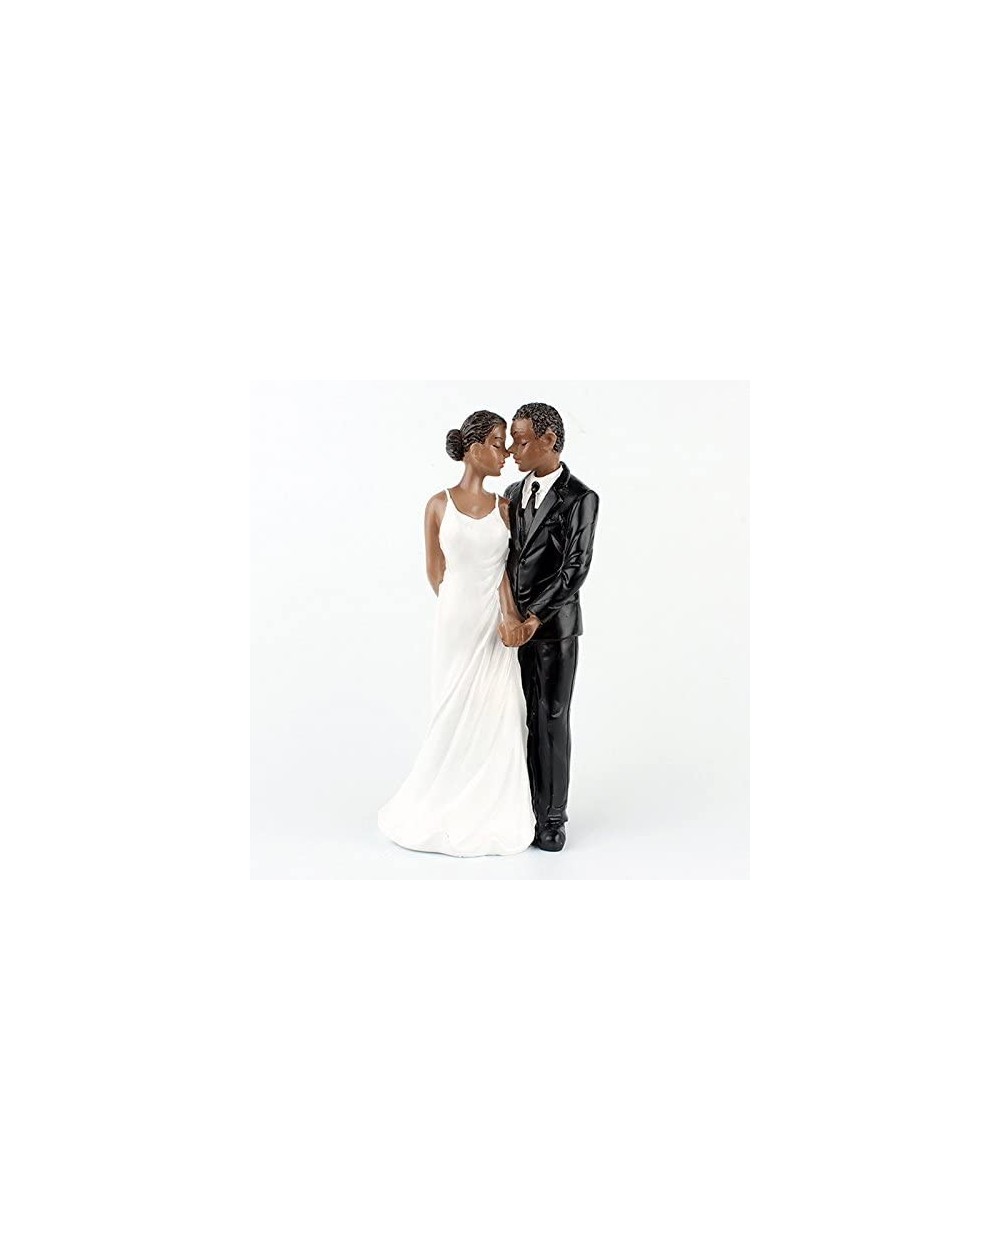 Cake & Cupcake Toppers Resin African American Wedding Figurine Decoration 6.30 inch Wedding Cake Toppers - CX184SDR6OA $15.70